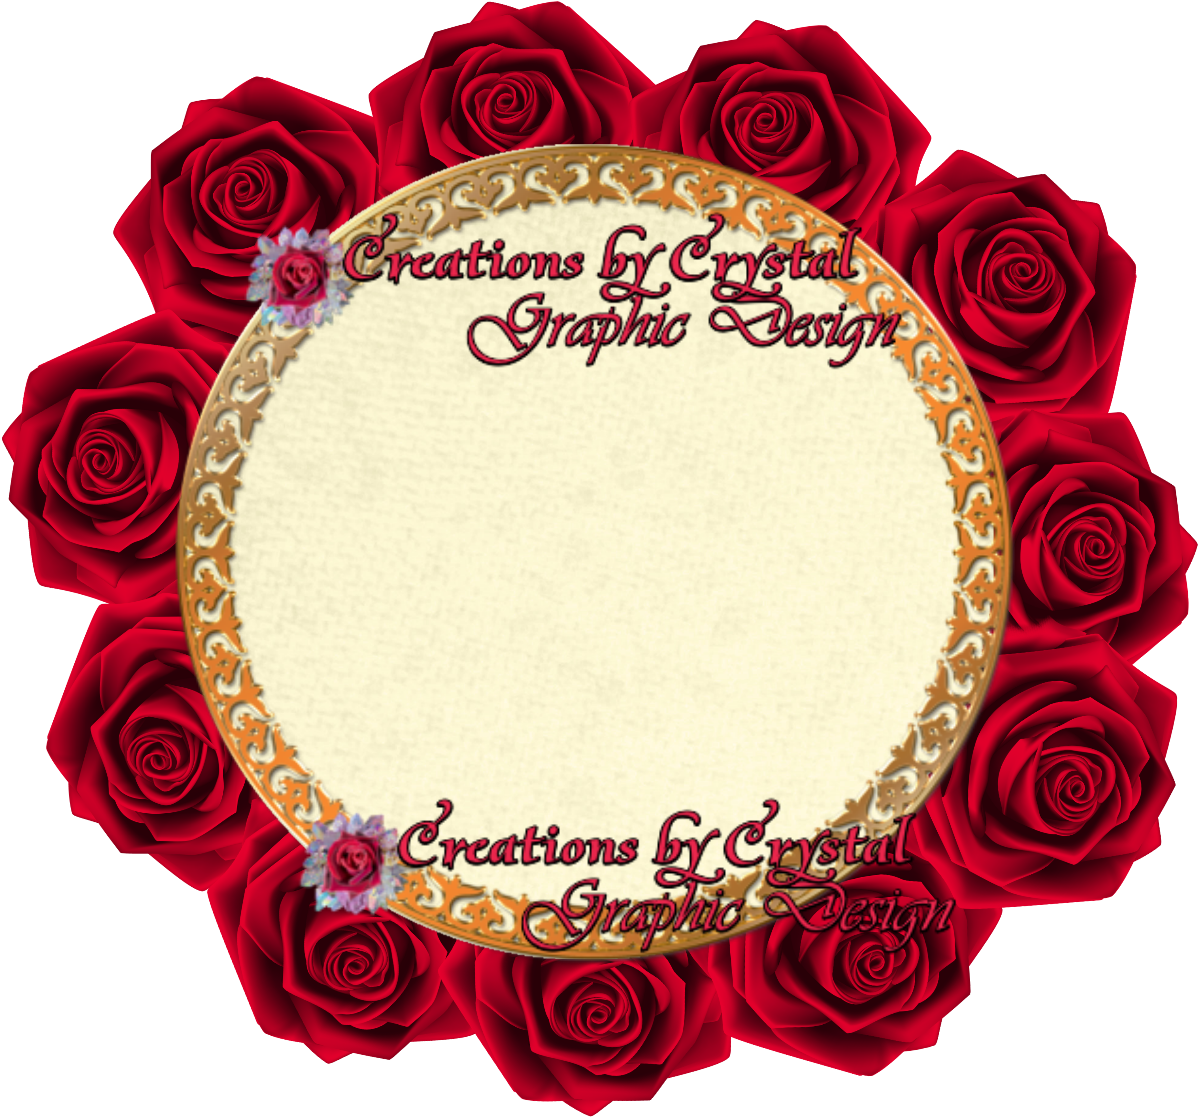 Cbyc Custom Borders Floral, Cbycgraphicdesign, Creations - Design (1200x1200), Png Download